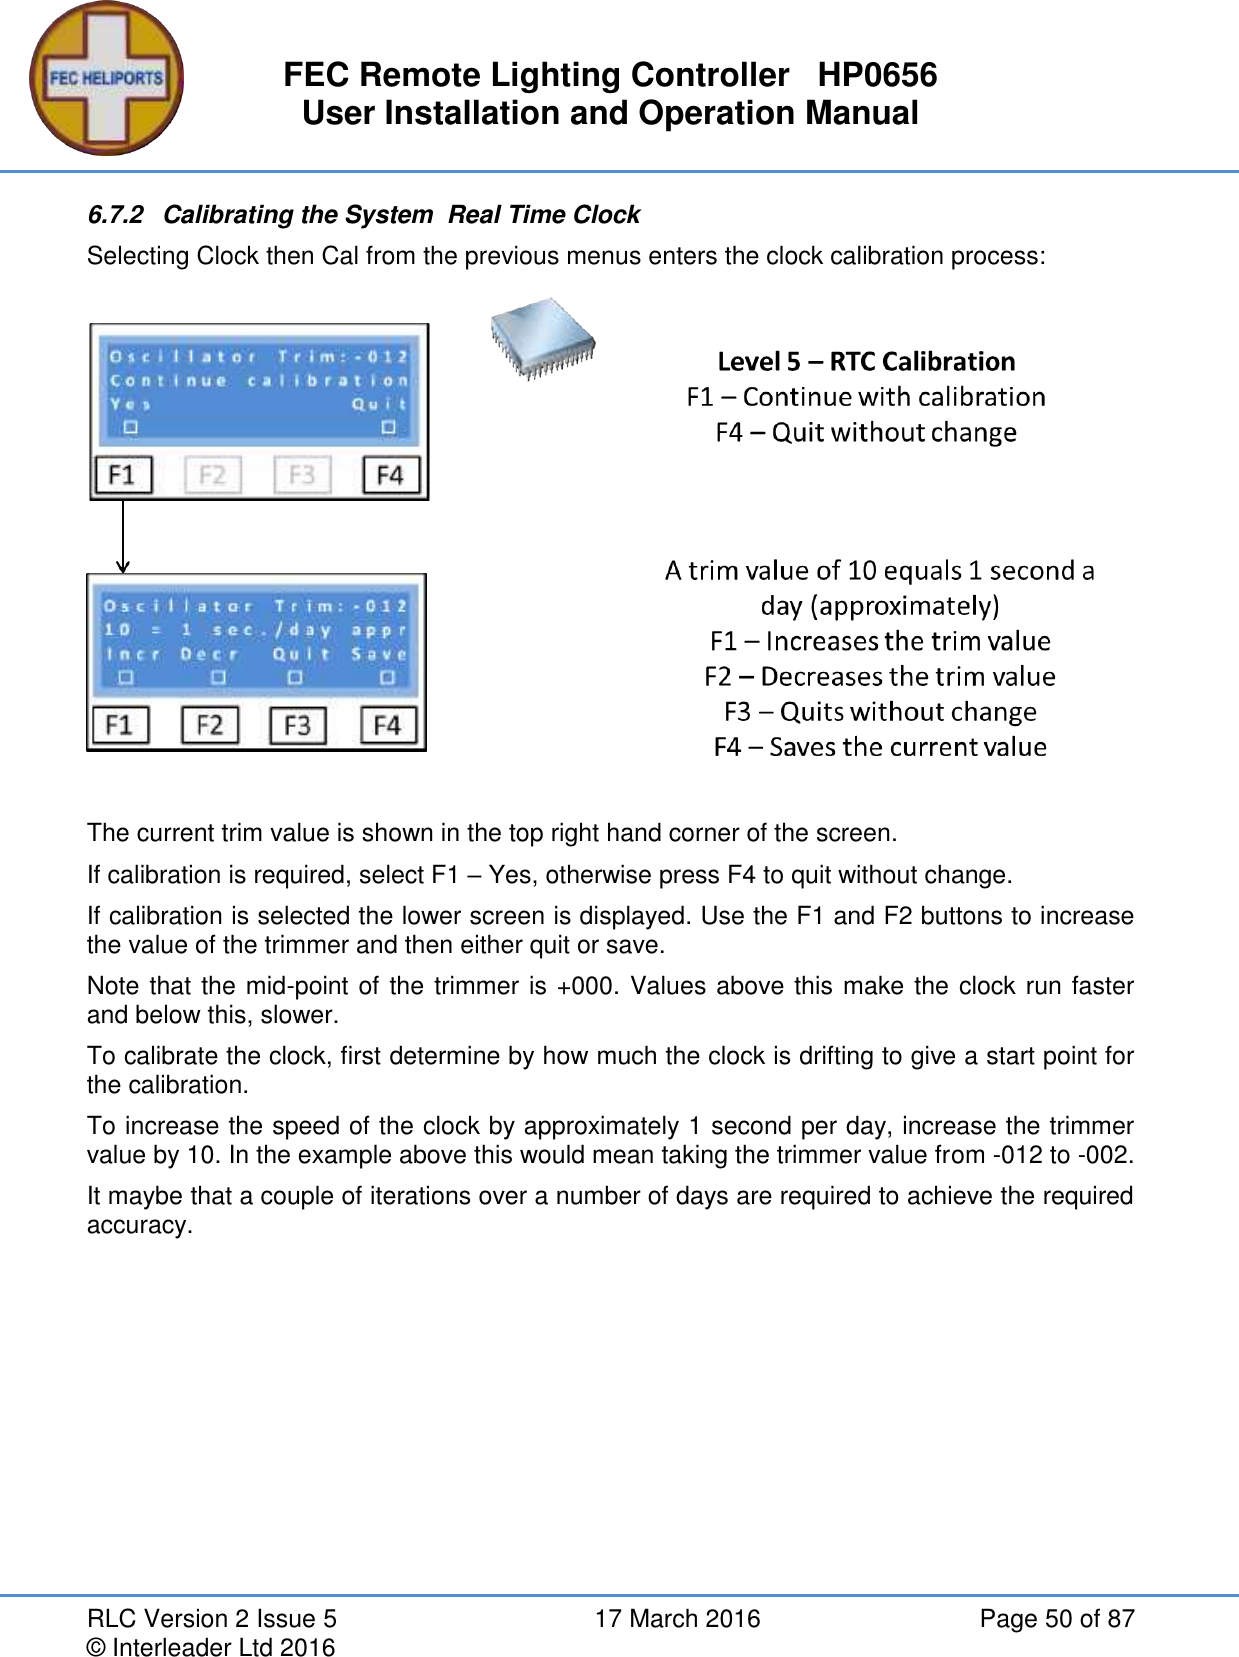 FEC Remote Lighting Controller   HP0656 User Installation and Operation Manual RLC Version 2 Issue 5  17 March 2016  Page 50 of 87 © Interleader Ltd 2016 6.7.2  Calibrating the System  Real Time Clock Selecting Clock then Cal from the previous menus enters the clock calibration process:  The current trim value is shown in the top right hand corner of the screen. If calibration is required, select F1 – Yes, otherwise press F4 to quit without change. If calibration is selected the lower screen is displayed. Use the F1 and F2 buttons to increase the value of the trimmer and then either quit or save. Note that the mid-point of the trimmer is +000. Values above this make the clock run faster and below this, slower. To calibrate the clock, first determine by how much the clock is drifting to give a start point for the calibration. To increase the speed of the clock by approximately 1 second per day, increase the trimmer value by 10. In the example above this would mean taking the trimmer value from -012 to -002. It maybe that a couple of iterations over a number of days are required to achieve the required accuracy.   